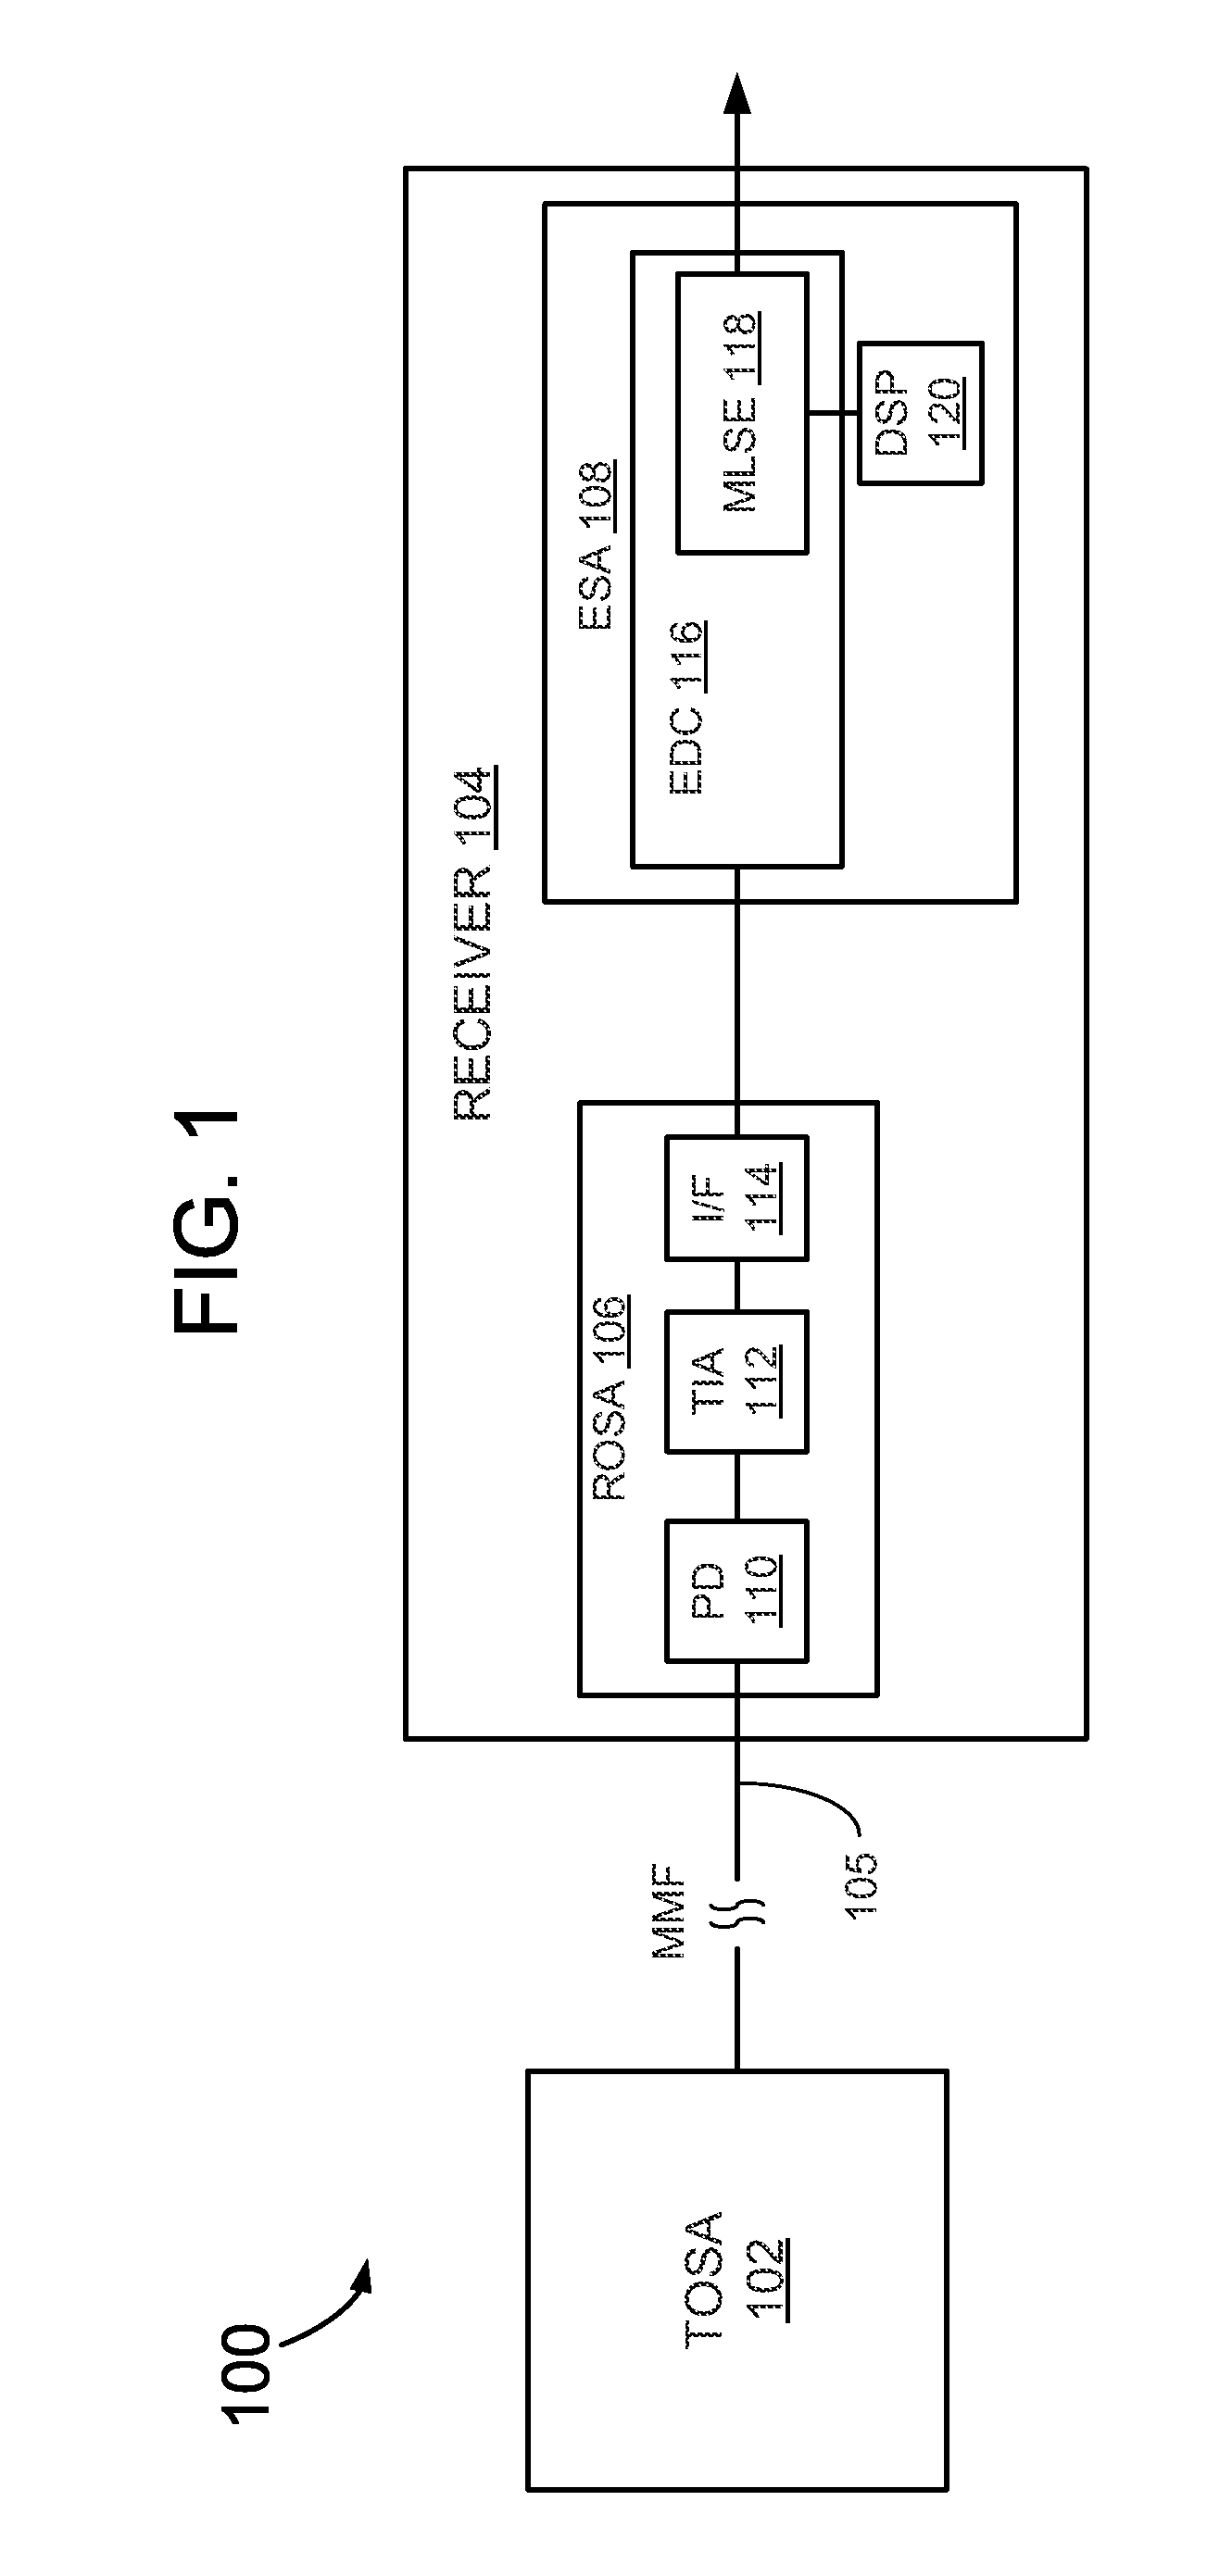 Apparatus and methods for estimating optical ethernet data sequences